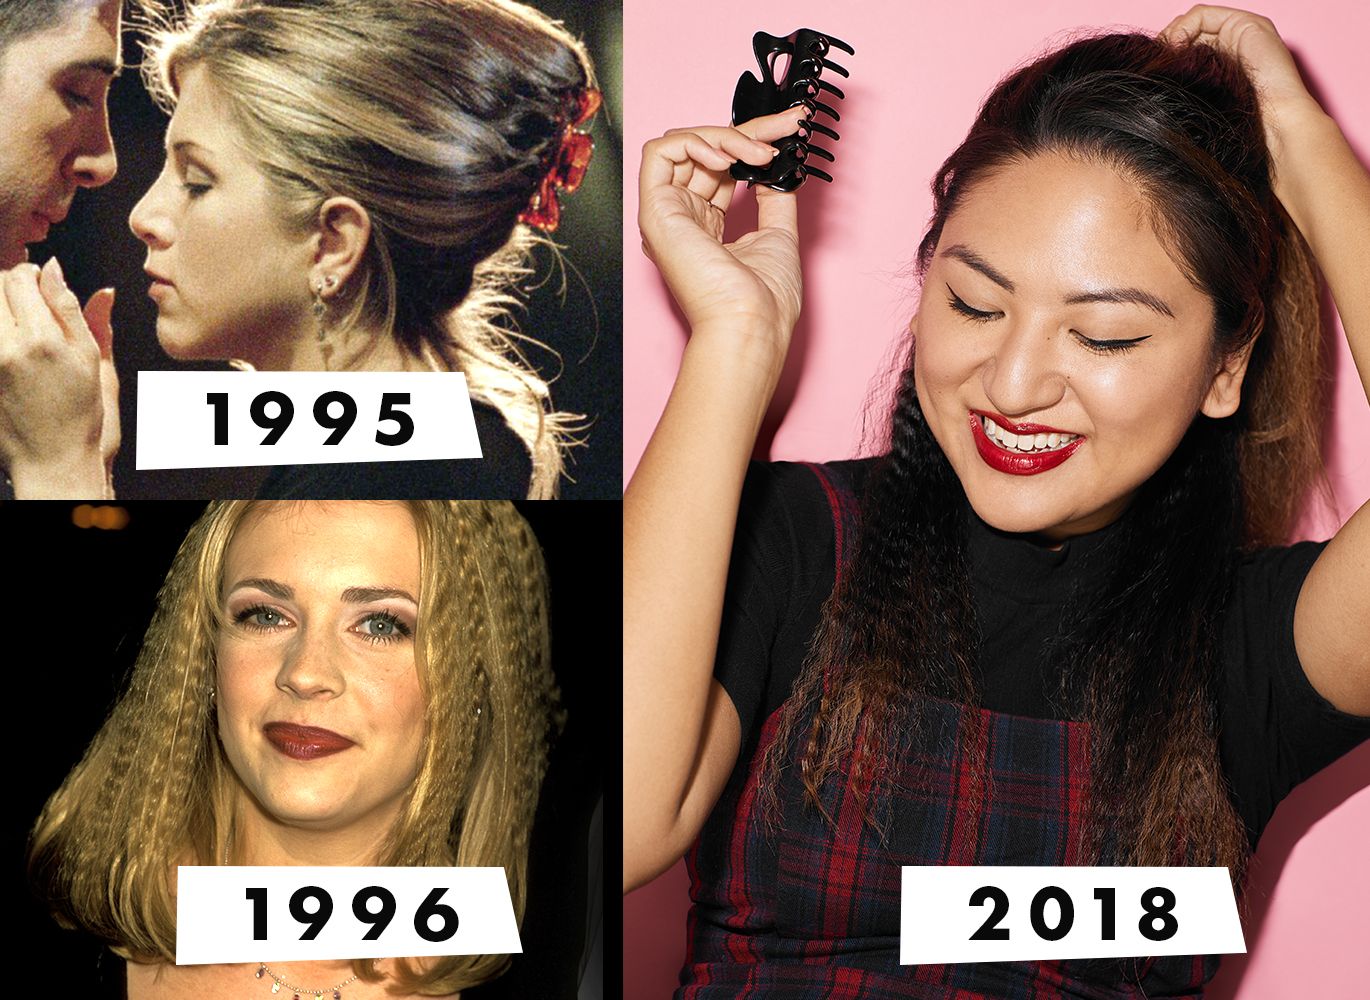 Butterfly Clips Are Back From the 90s and Begging to Be Fall 2020s  Favorite Hair Accessory